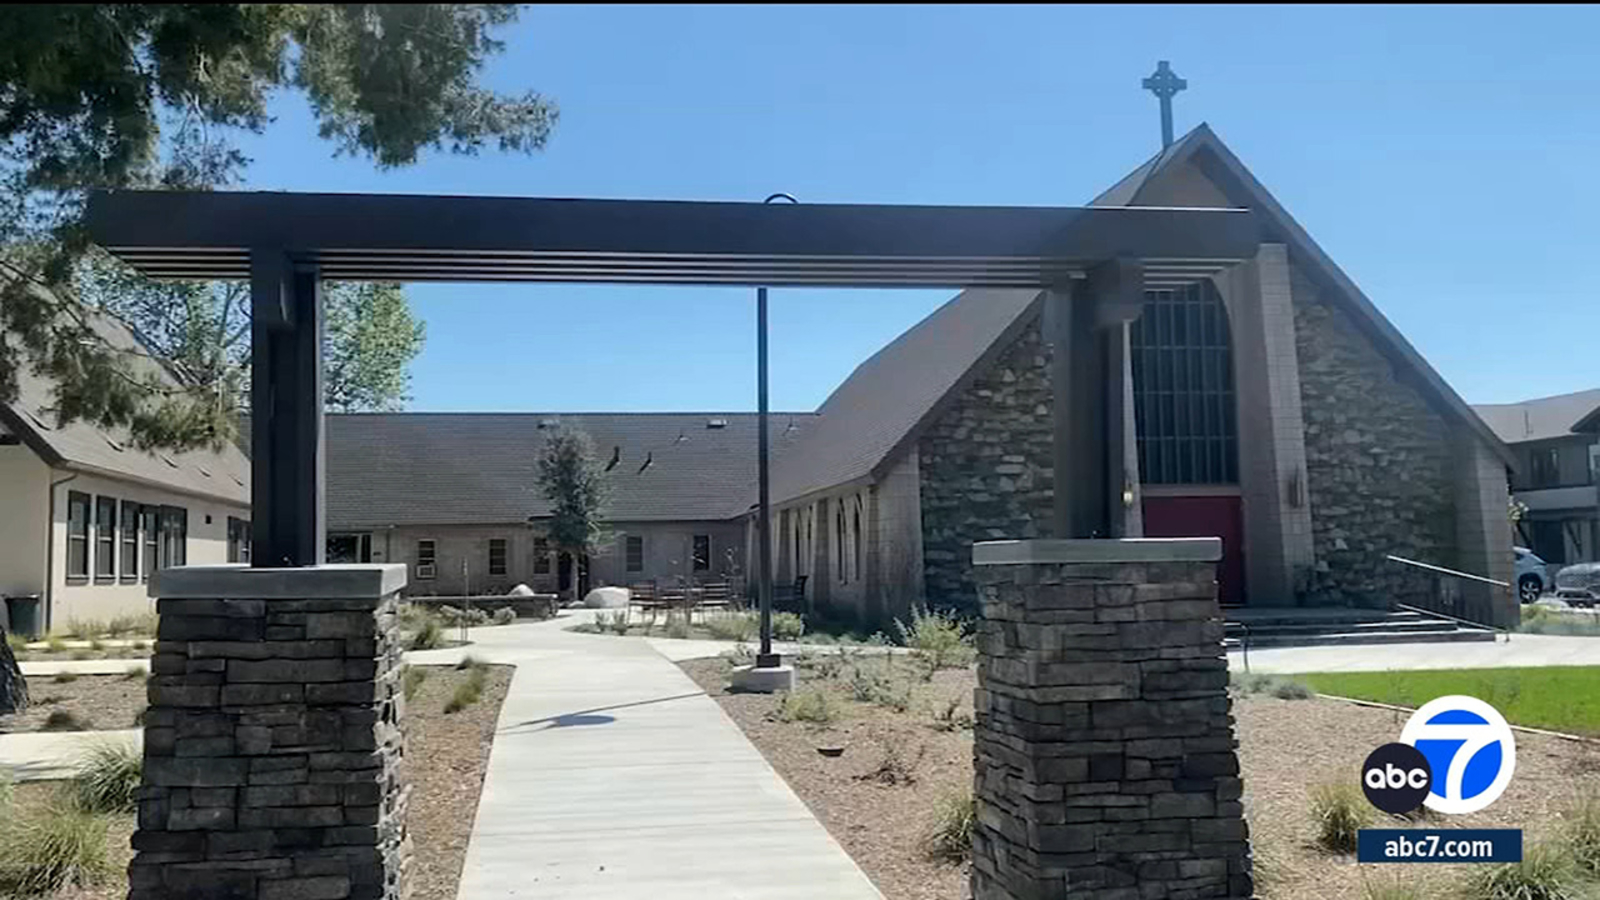 CA law helps churches, nonprofits build affordable housing quicker